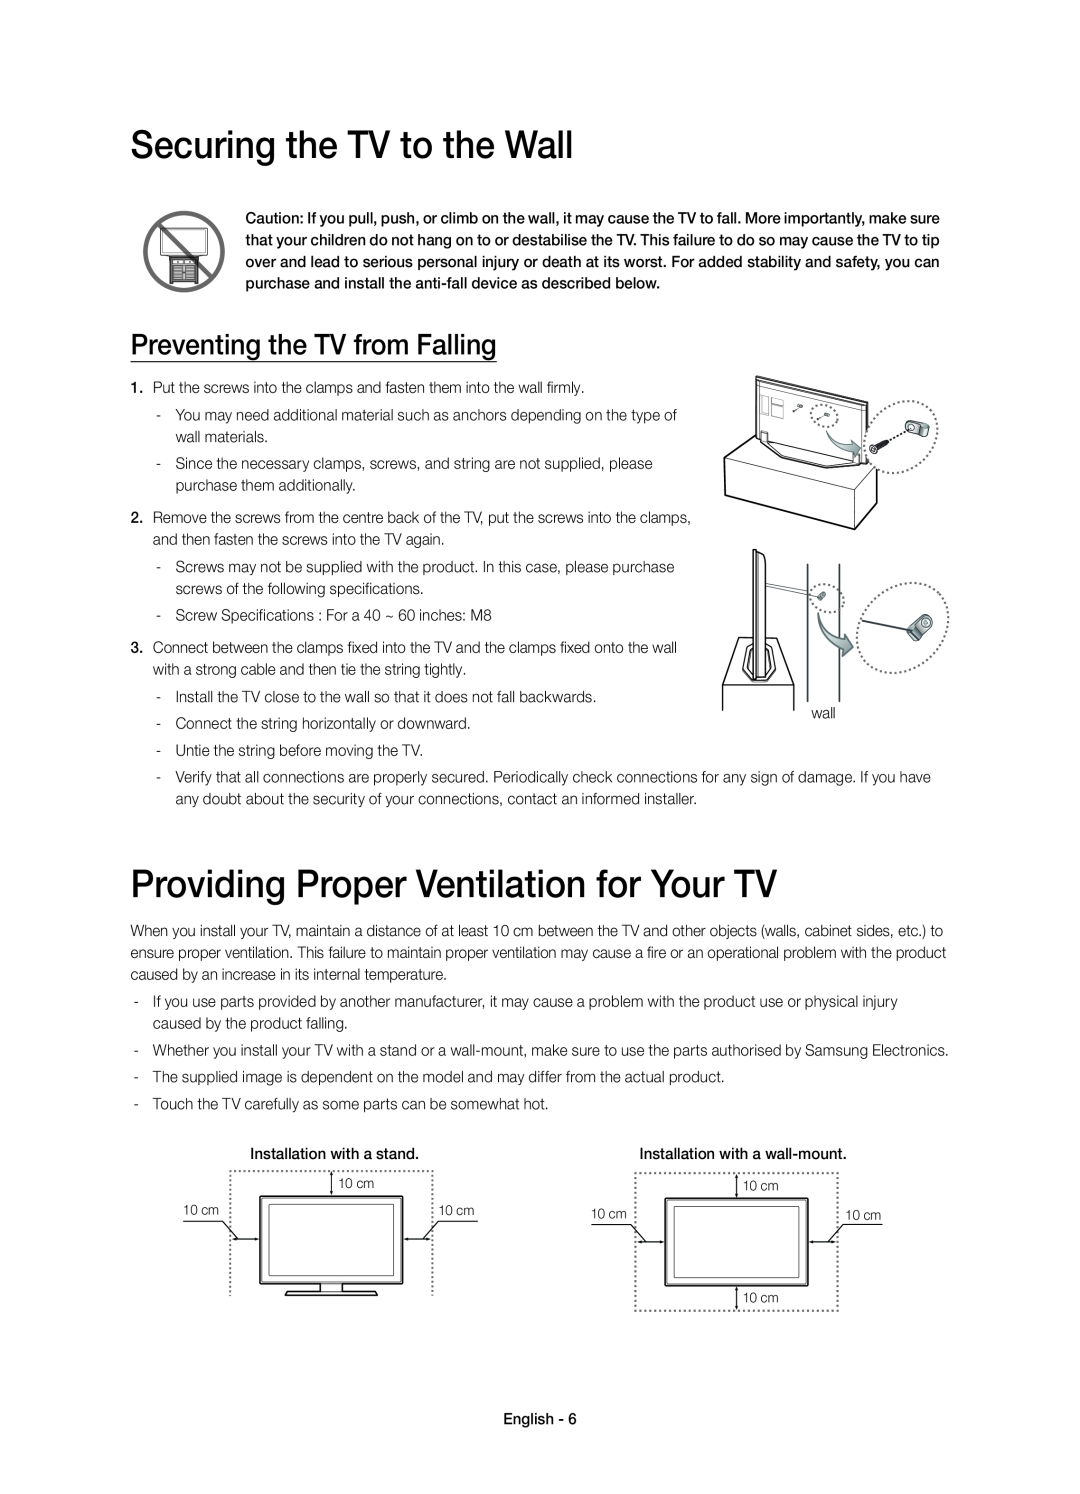 Samsung UE55H7000SZXZT, UE60H7000SZXZT manual Securing the TV to the Wall, Providing Proper Ventilation for Your TV 